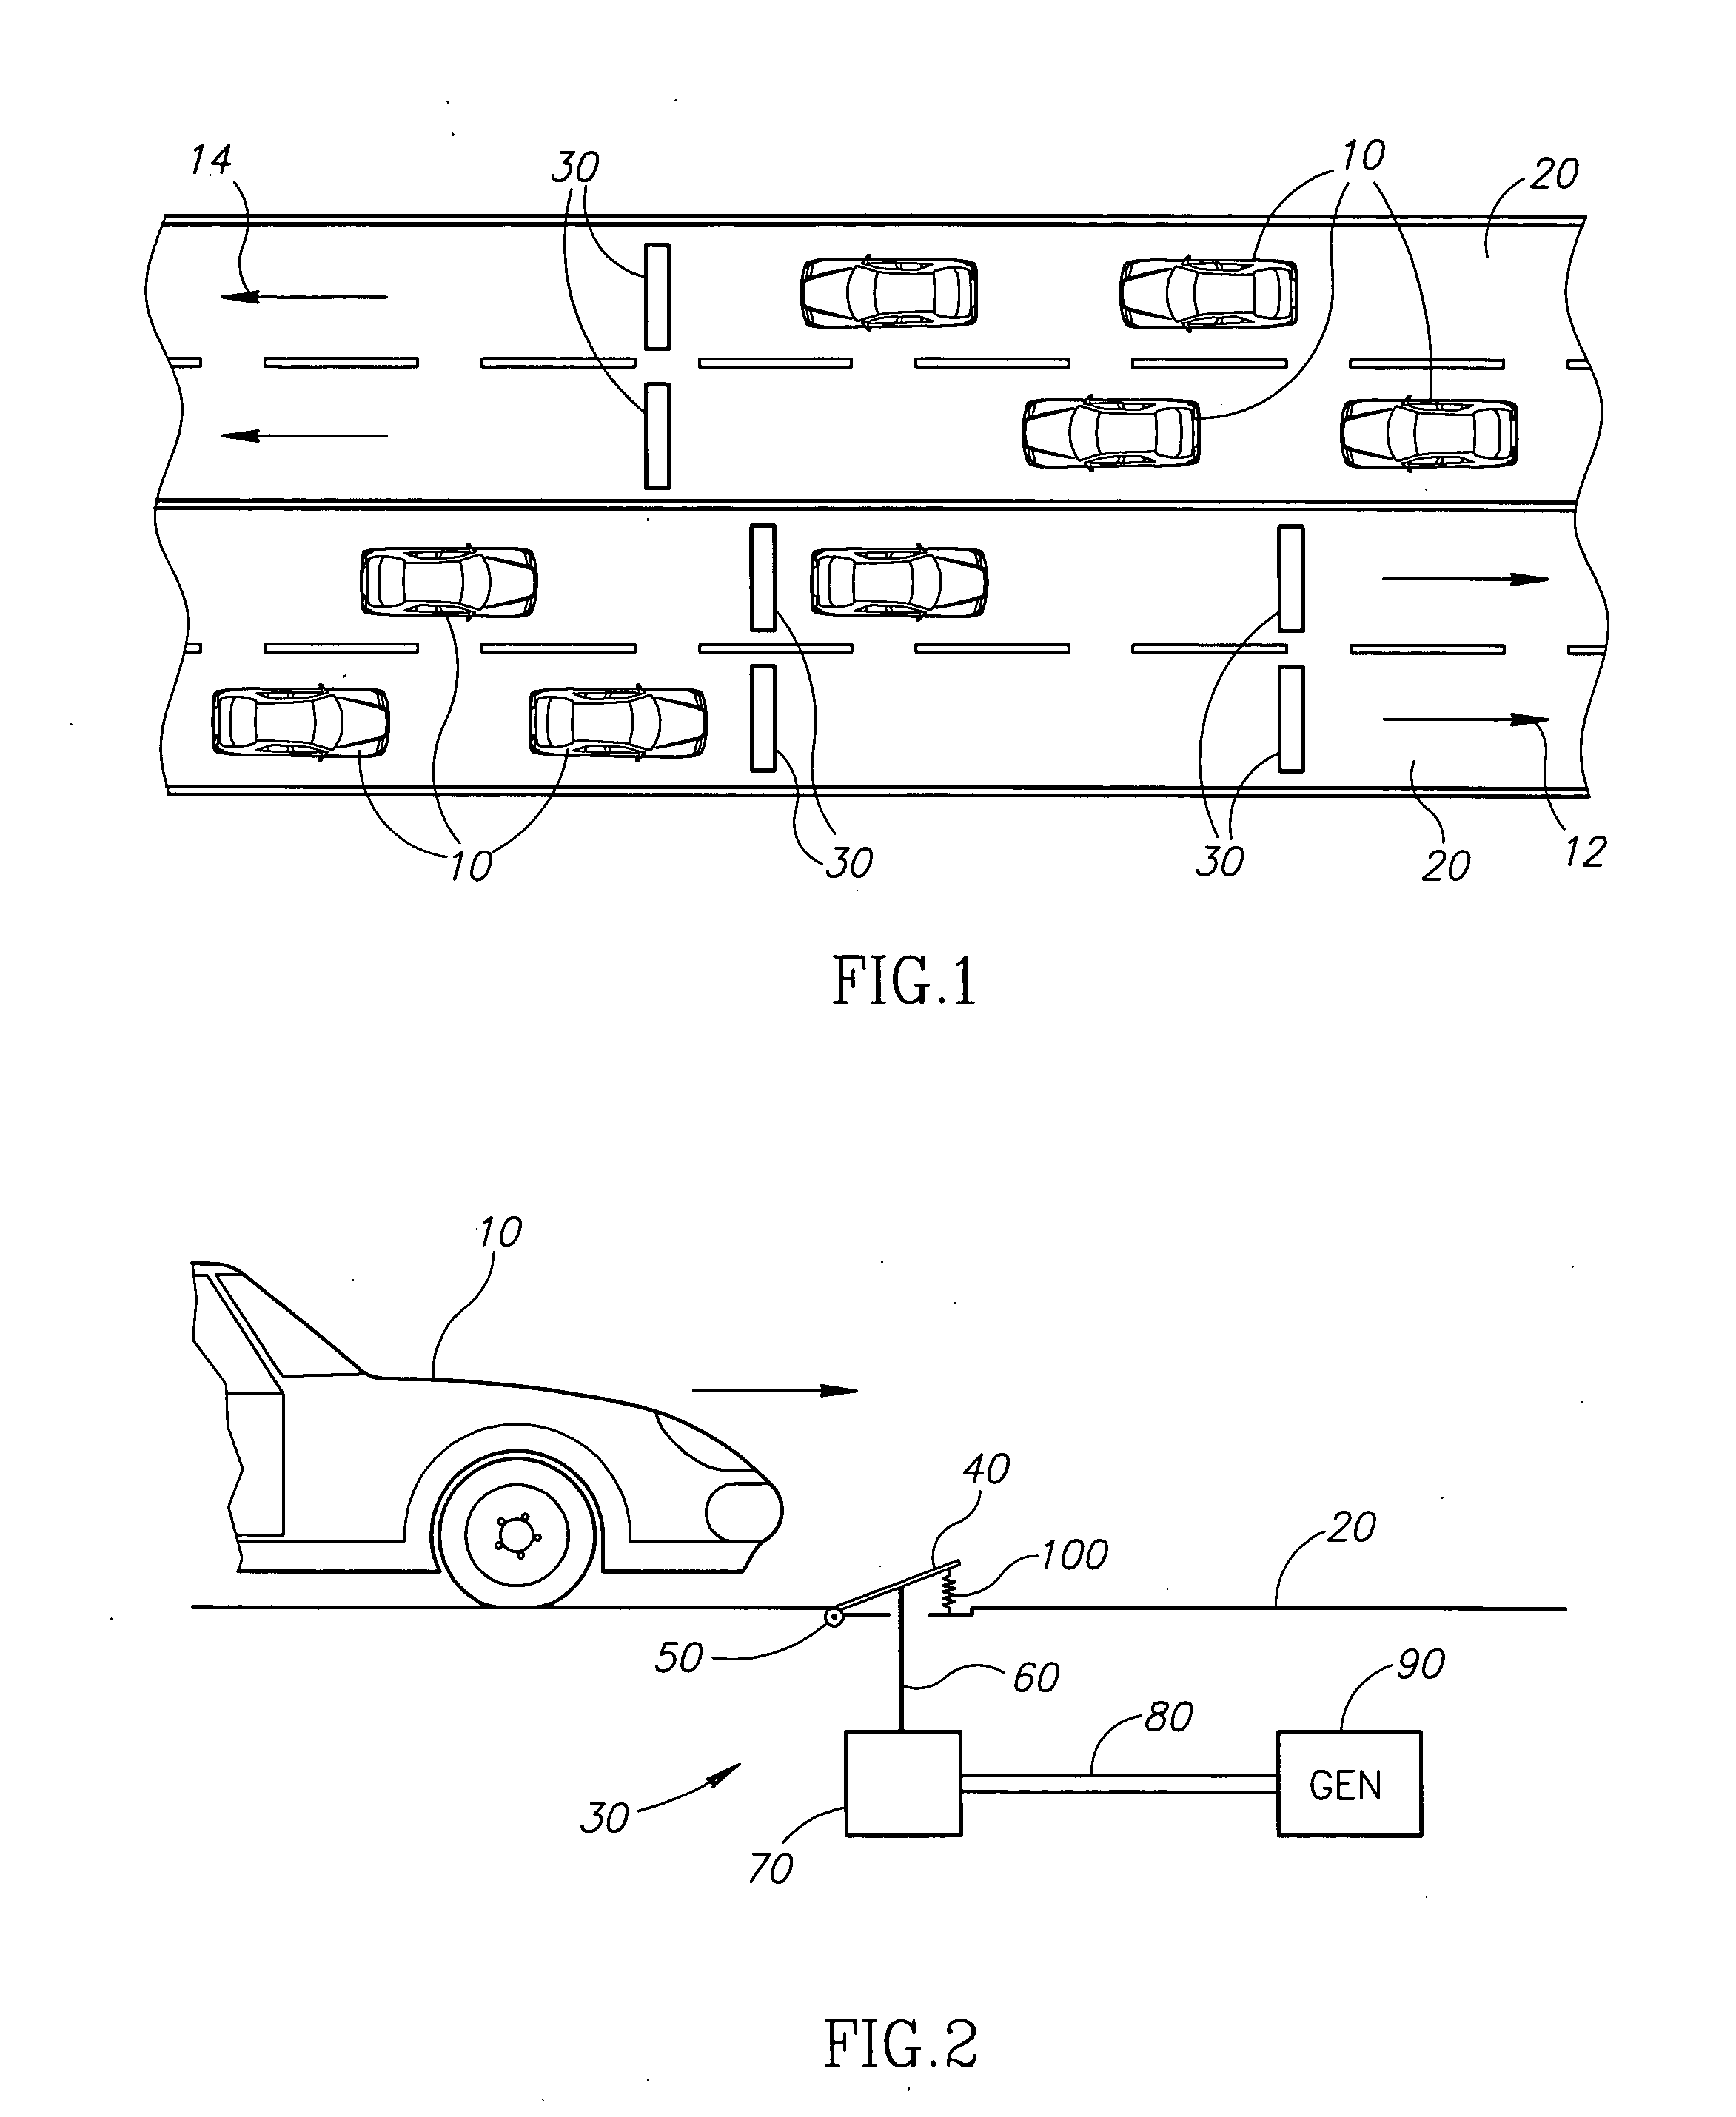 Hydraulic roadbed electricity generating apparatus and method